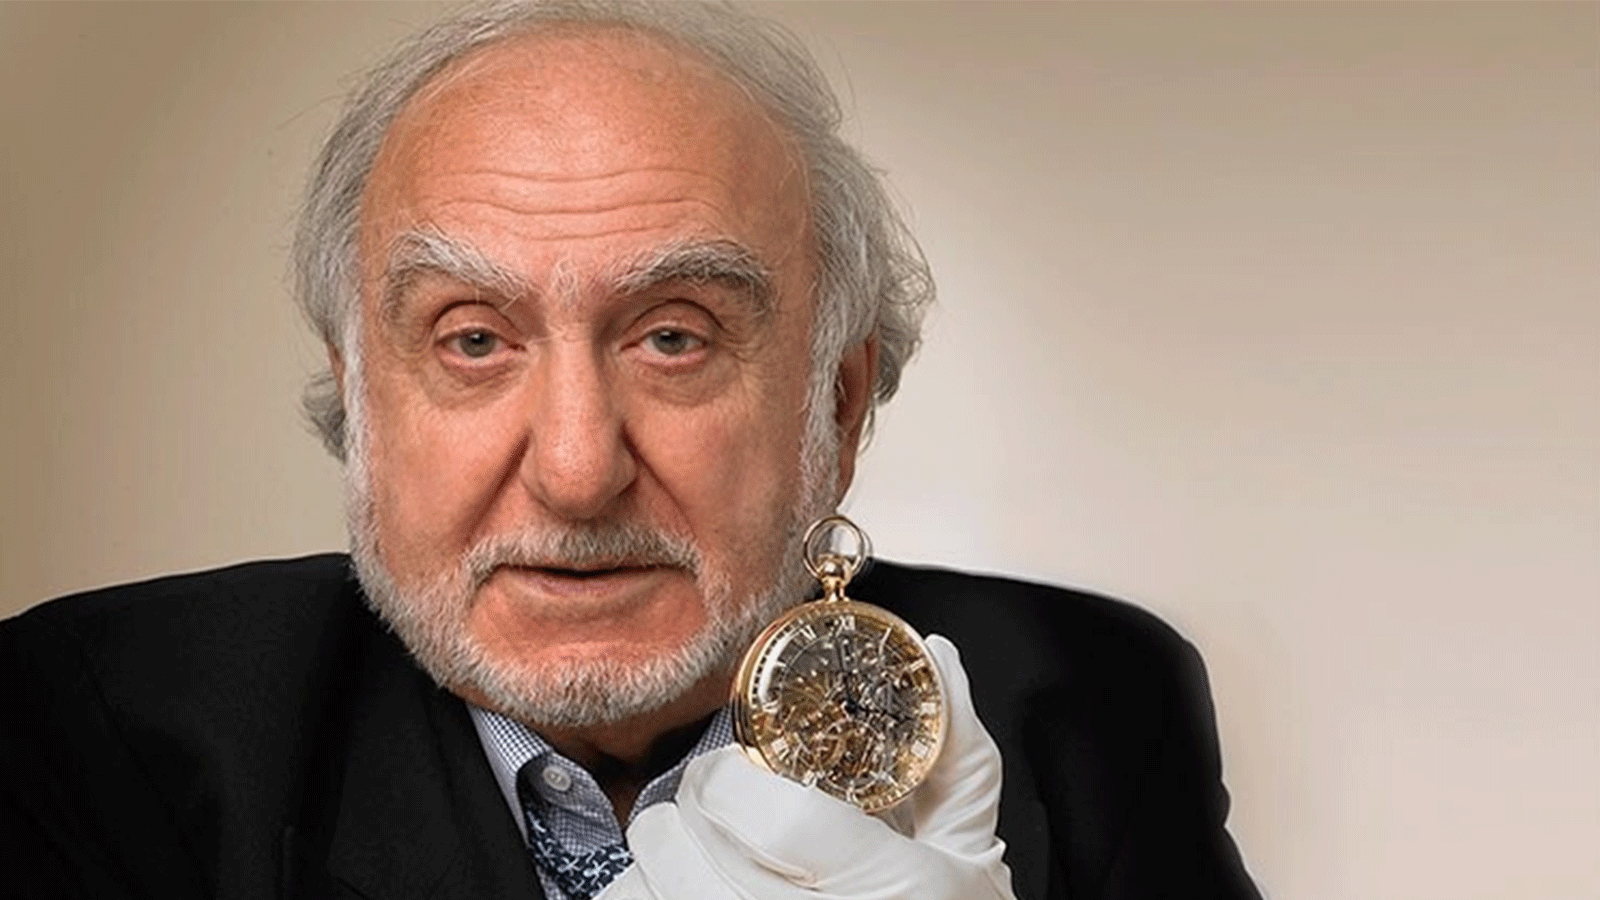 1999, Nicolas G. Hayek took over one of the most pre­cious names in fine watchmaking which was lying somewhat dormant at the time. Driven by a genuine passion, he infused peerless vitality into a brand endowed with an exceptional herit­age and know-how that are recognised by the most prestigious peers.